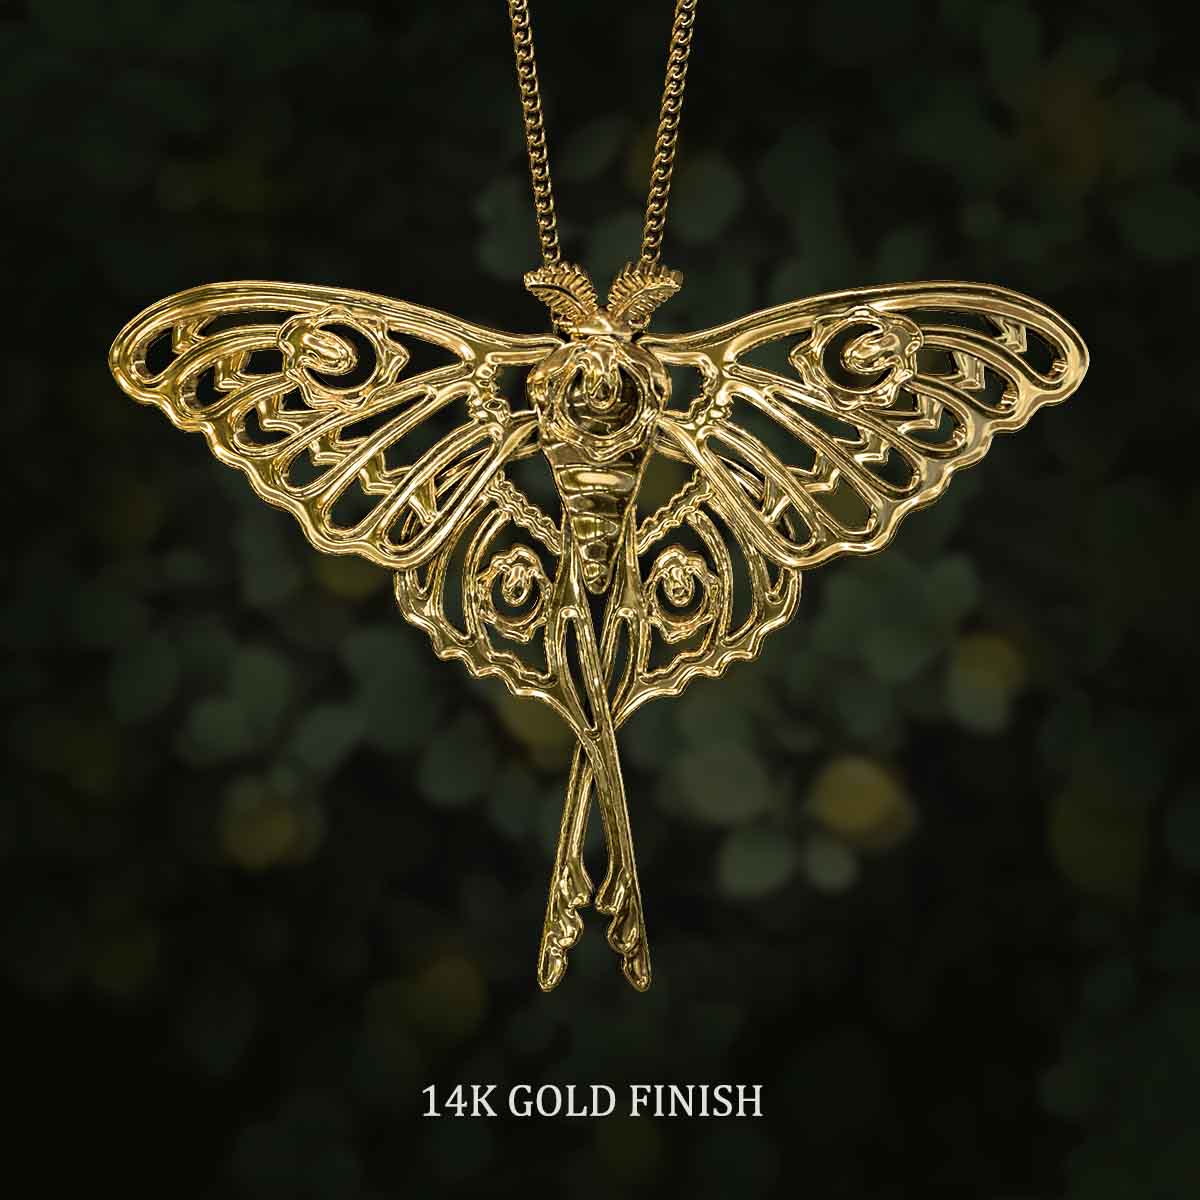     14K-Gold-Finish-Comet-Moth-Pendant-Jewelry-For-Necklace